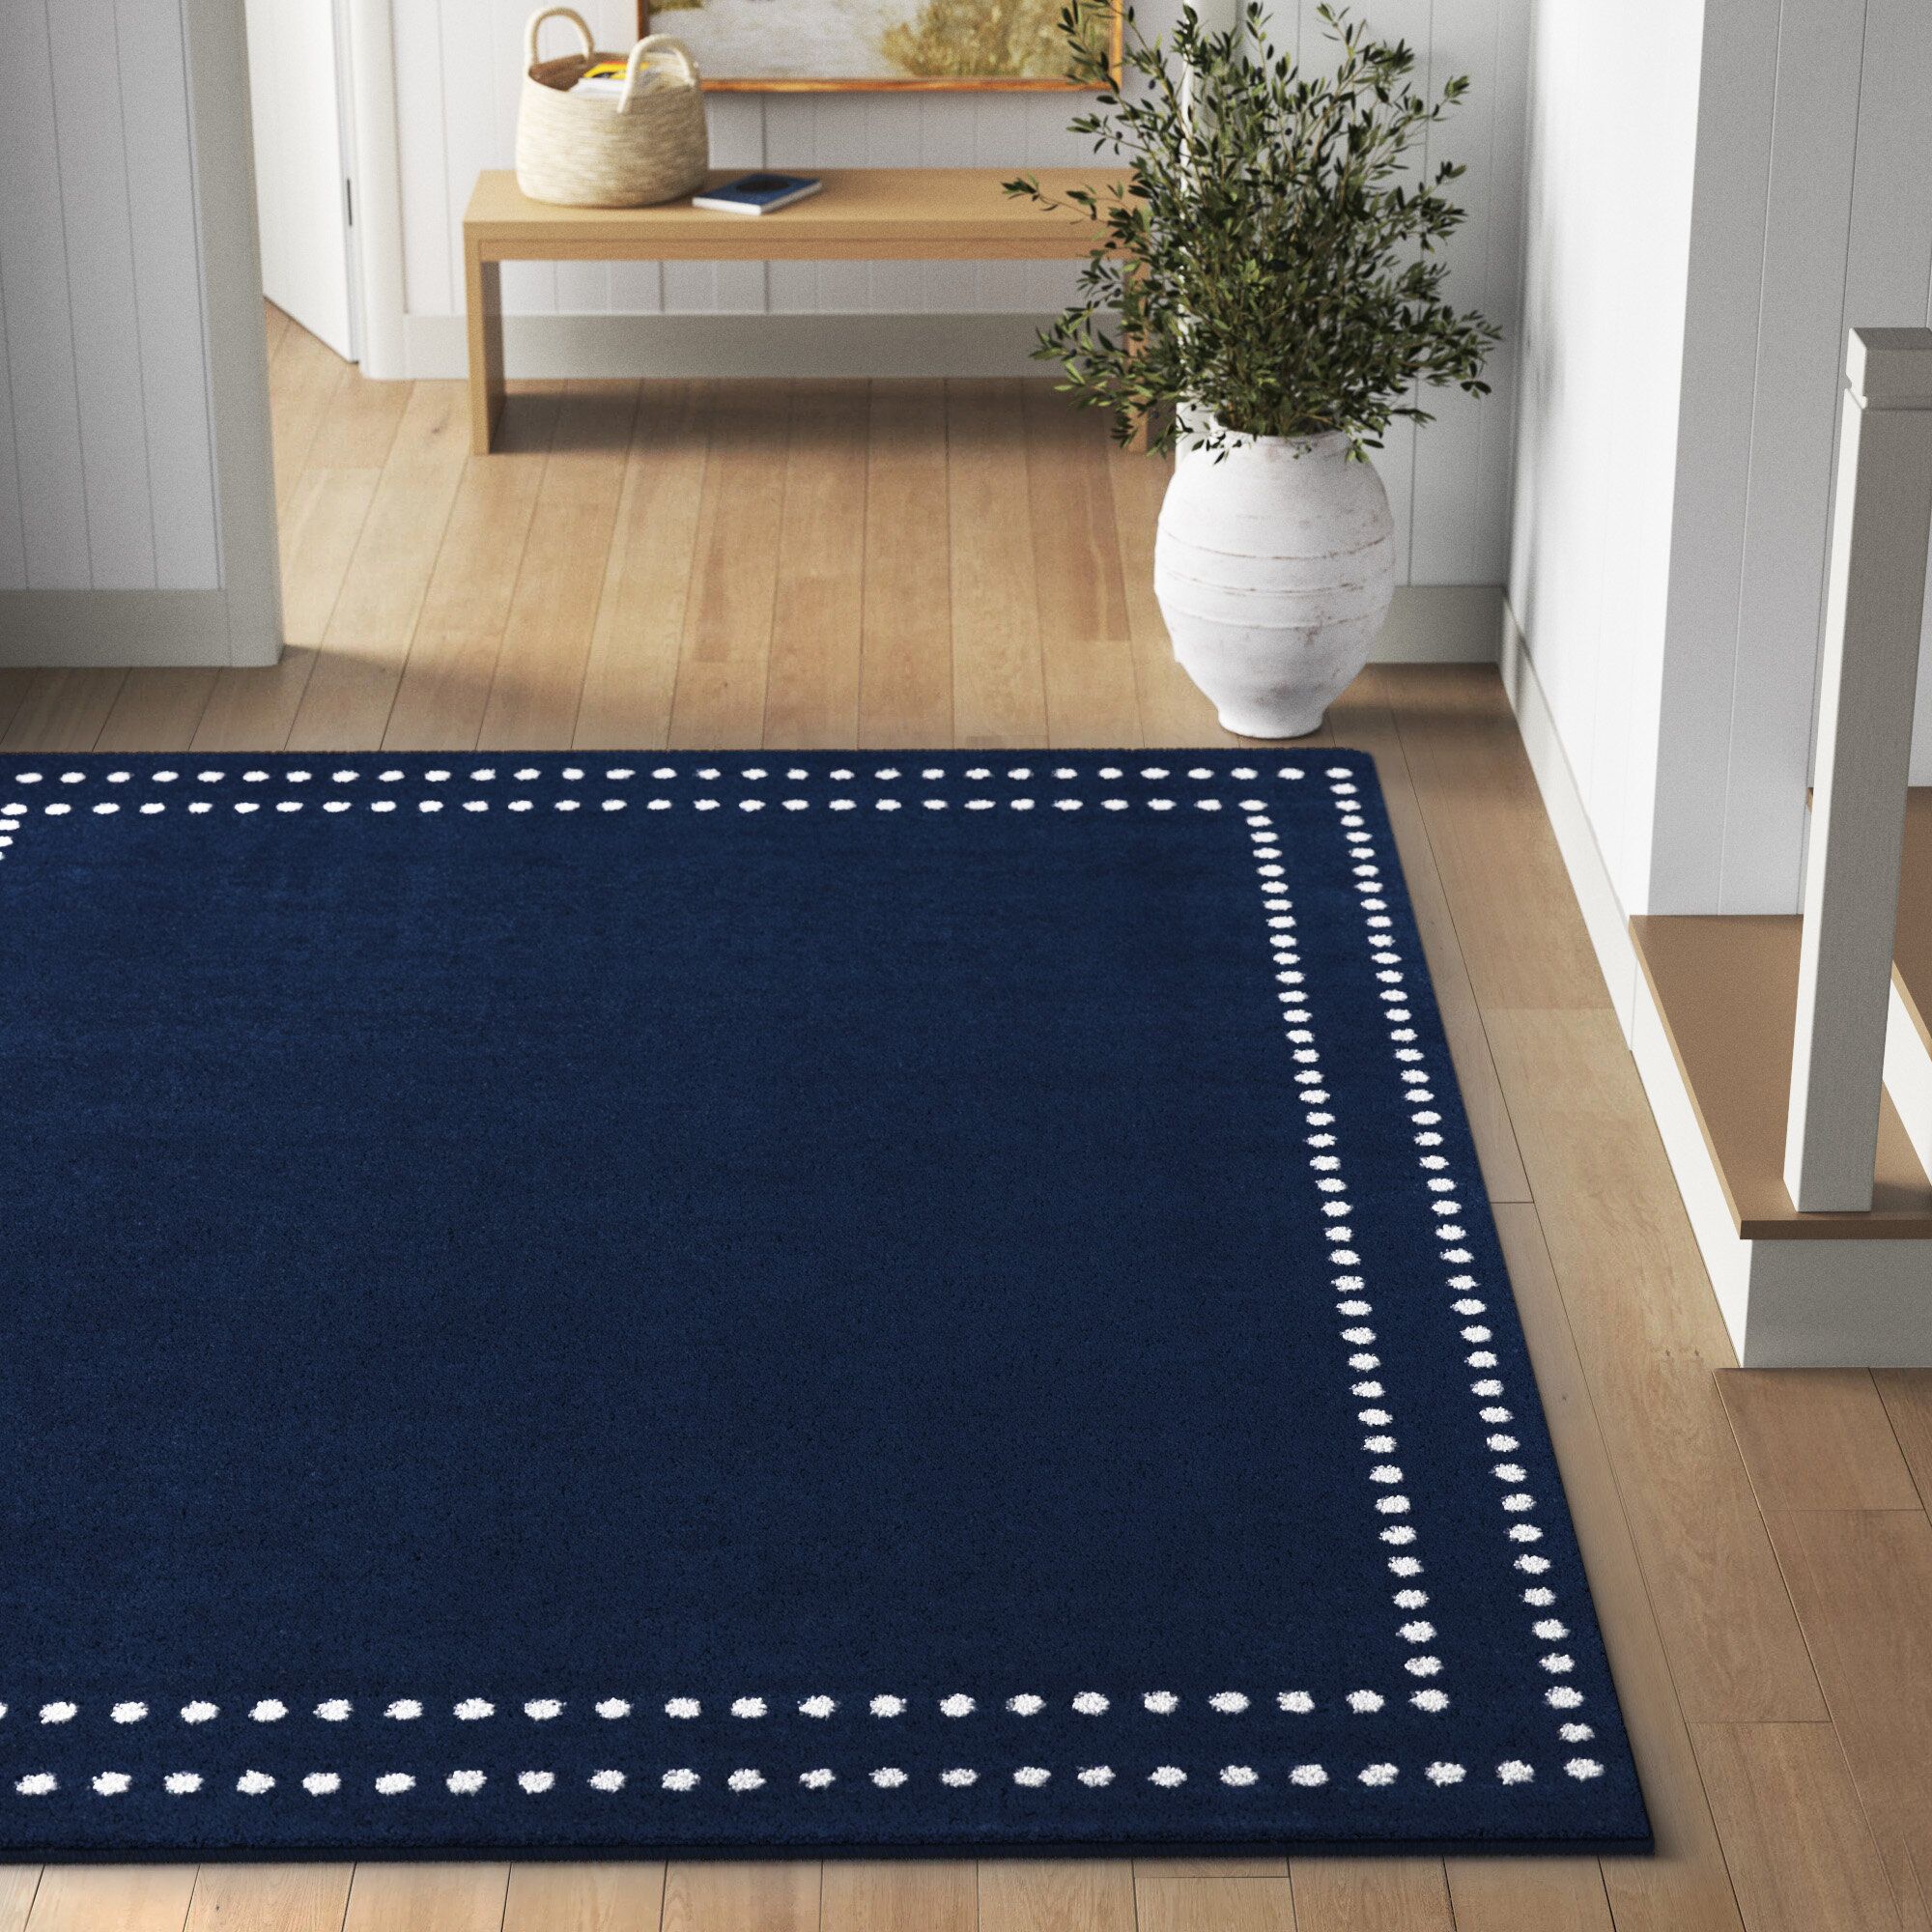 Sand & Stable Toston Performance Navy Blue Rug & Reviews | Wayfair Inside Navy Blue Rugs (View 3 of 15)